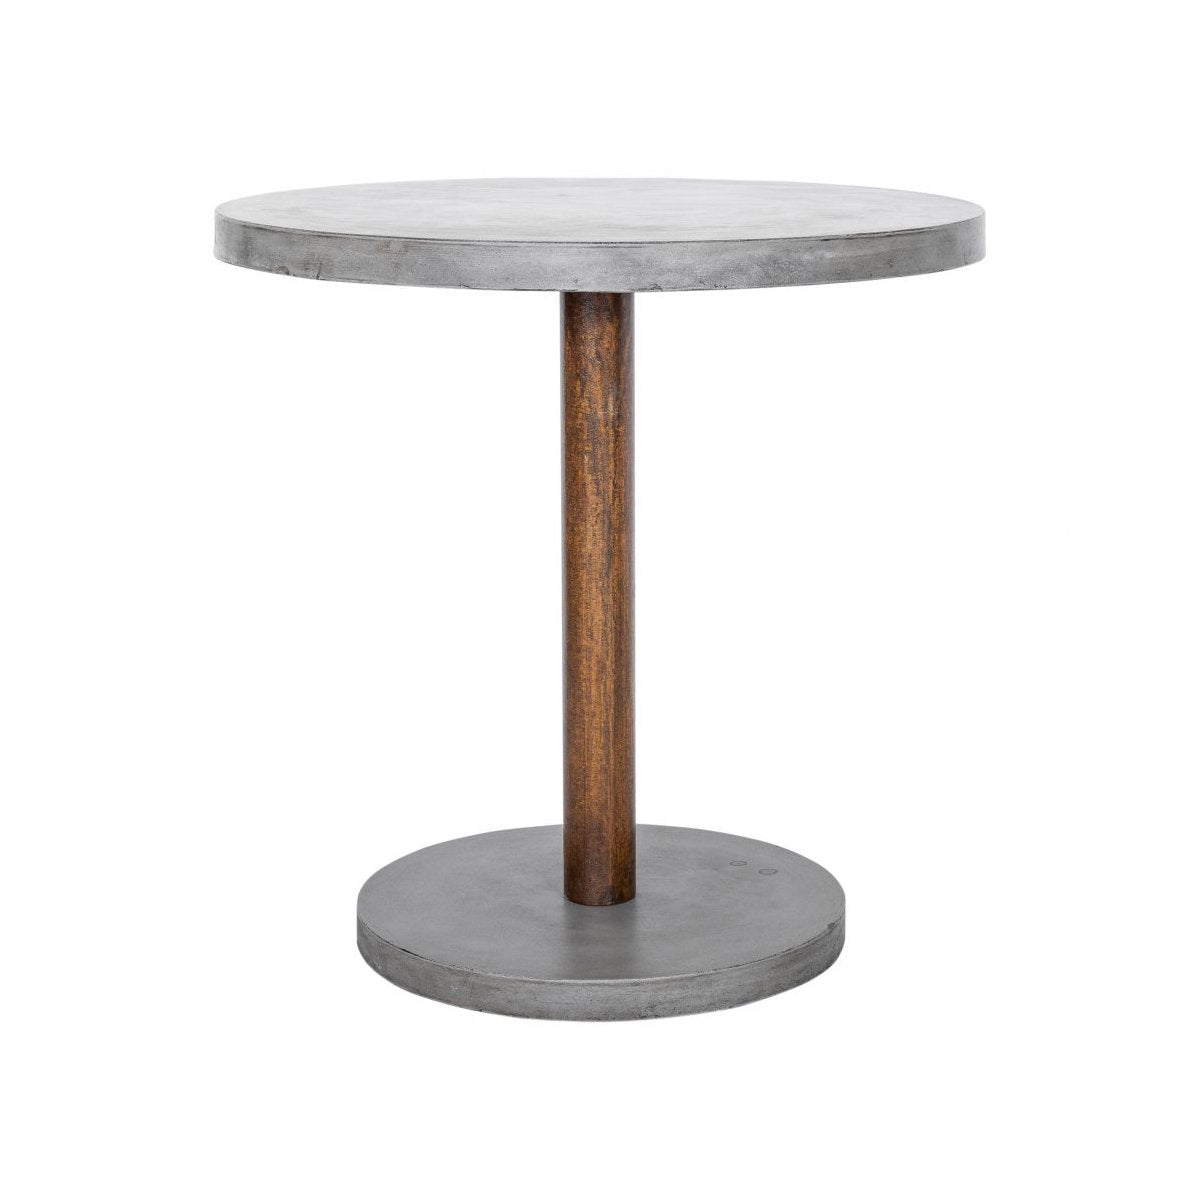 Hagan Outdoor Counter Height Table Counter Tables Moe's     Four Hands, Burke Decor, Mid Century Modern Furniture, Old Bones Furniture Company, Old Bones Co, Modern Mid Century, Designer Furniture, https://www.oldbonesco.com/